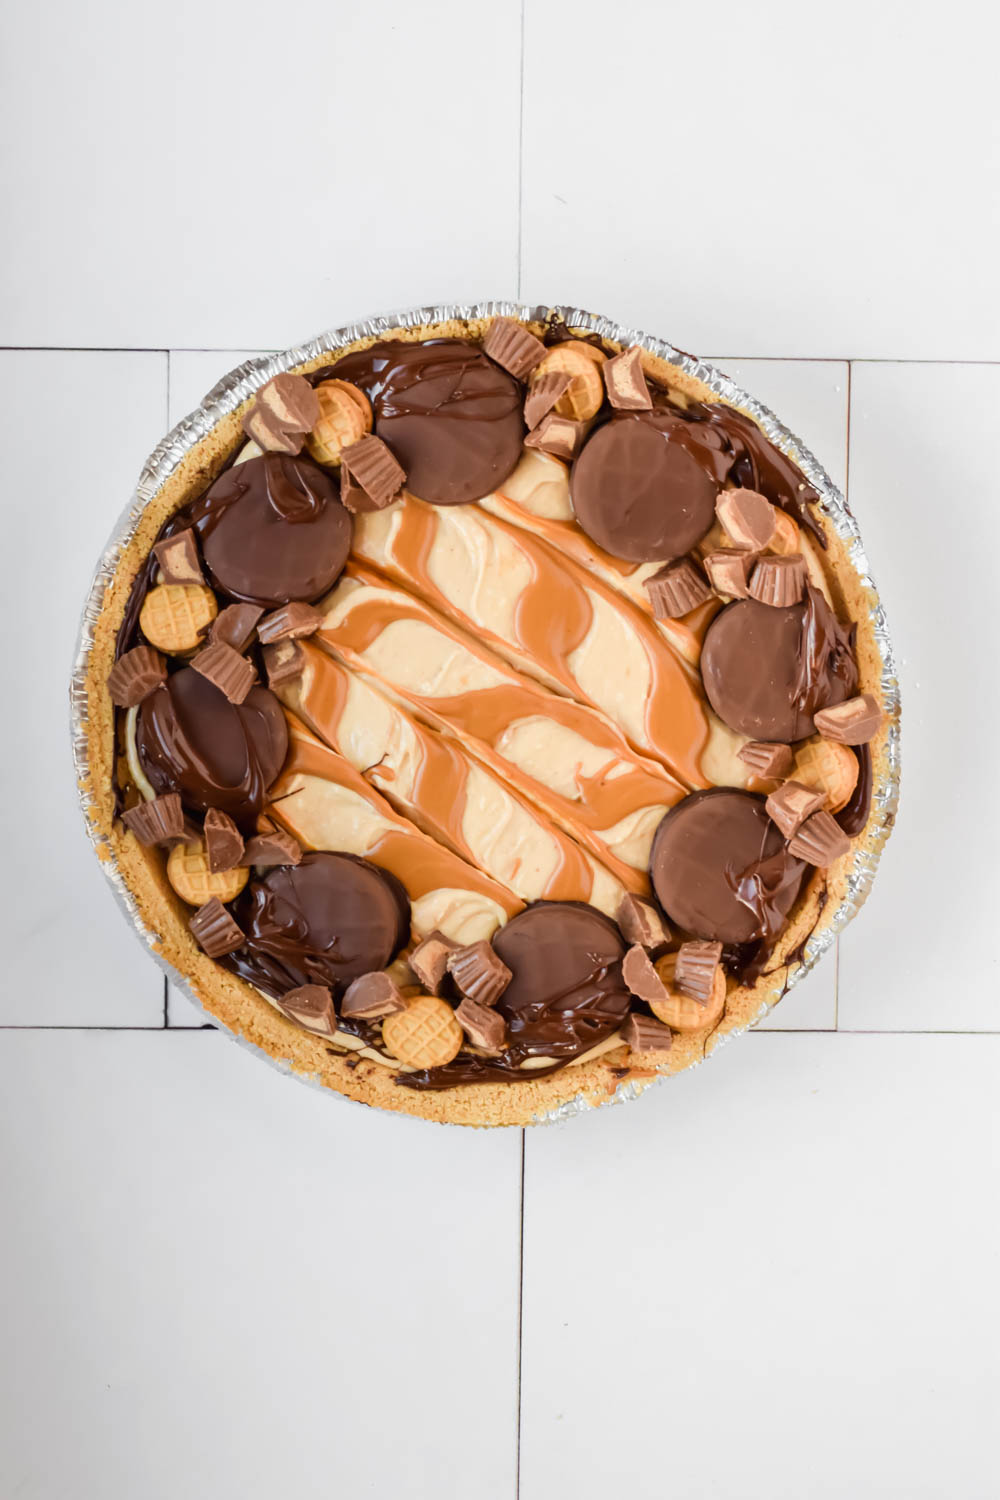 nutter butter pie swirled with peanut butter on top with additional chocolate peanut butter candies garnishing pie in foil pie pan on white background.